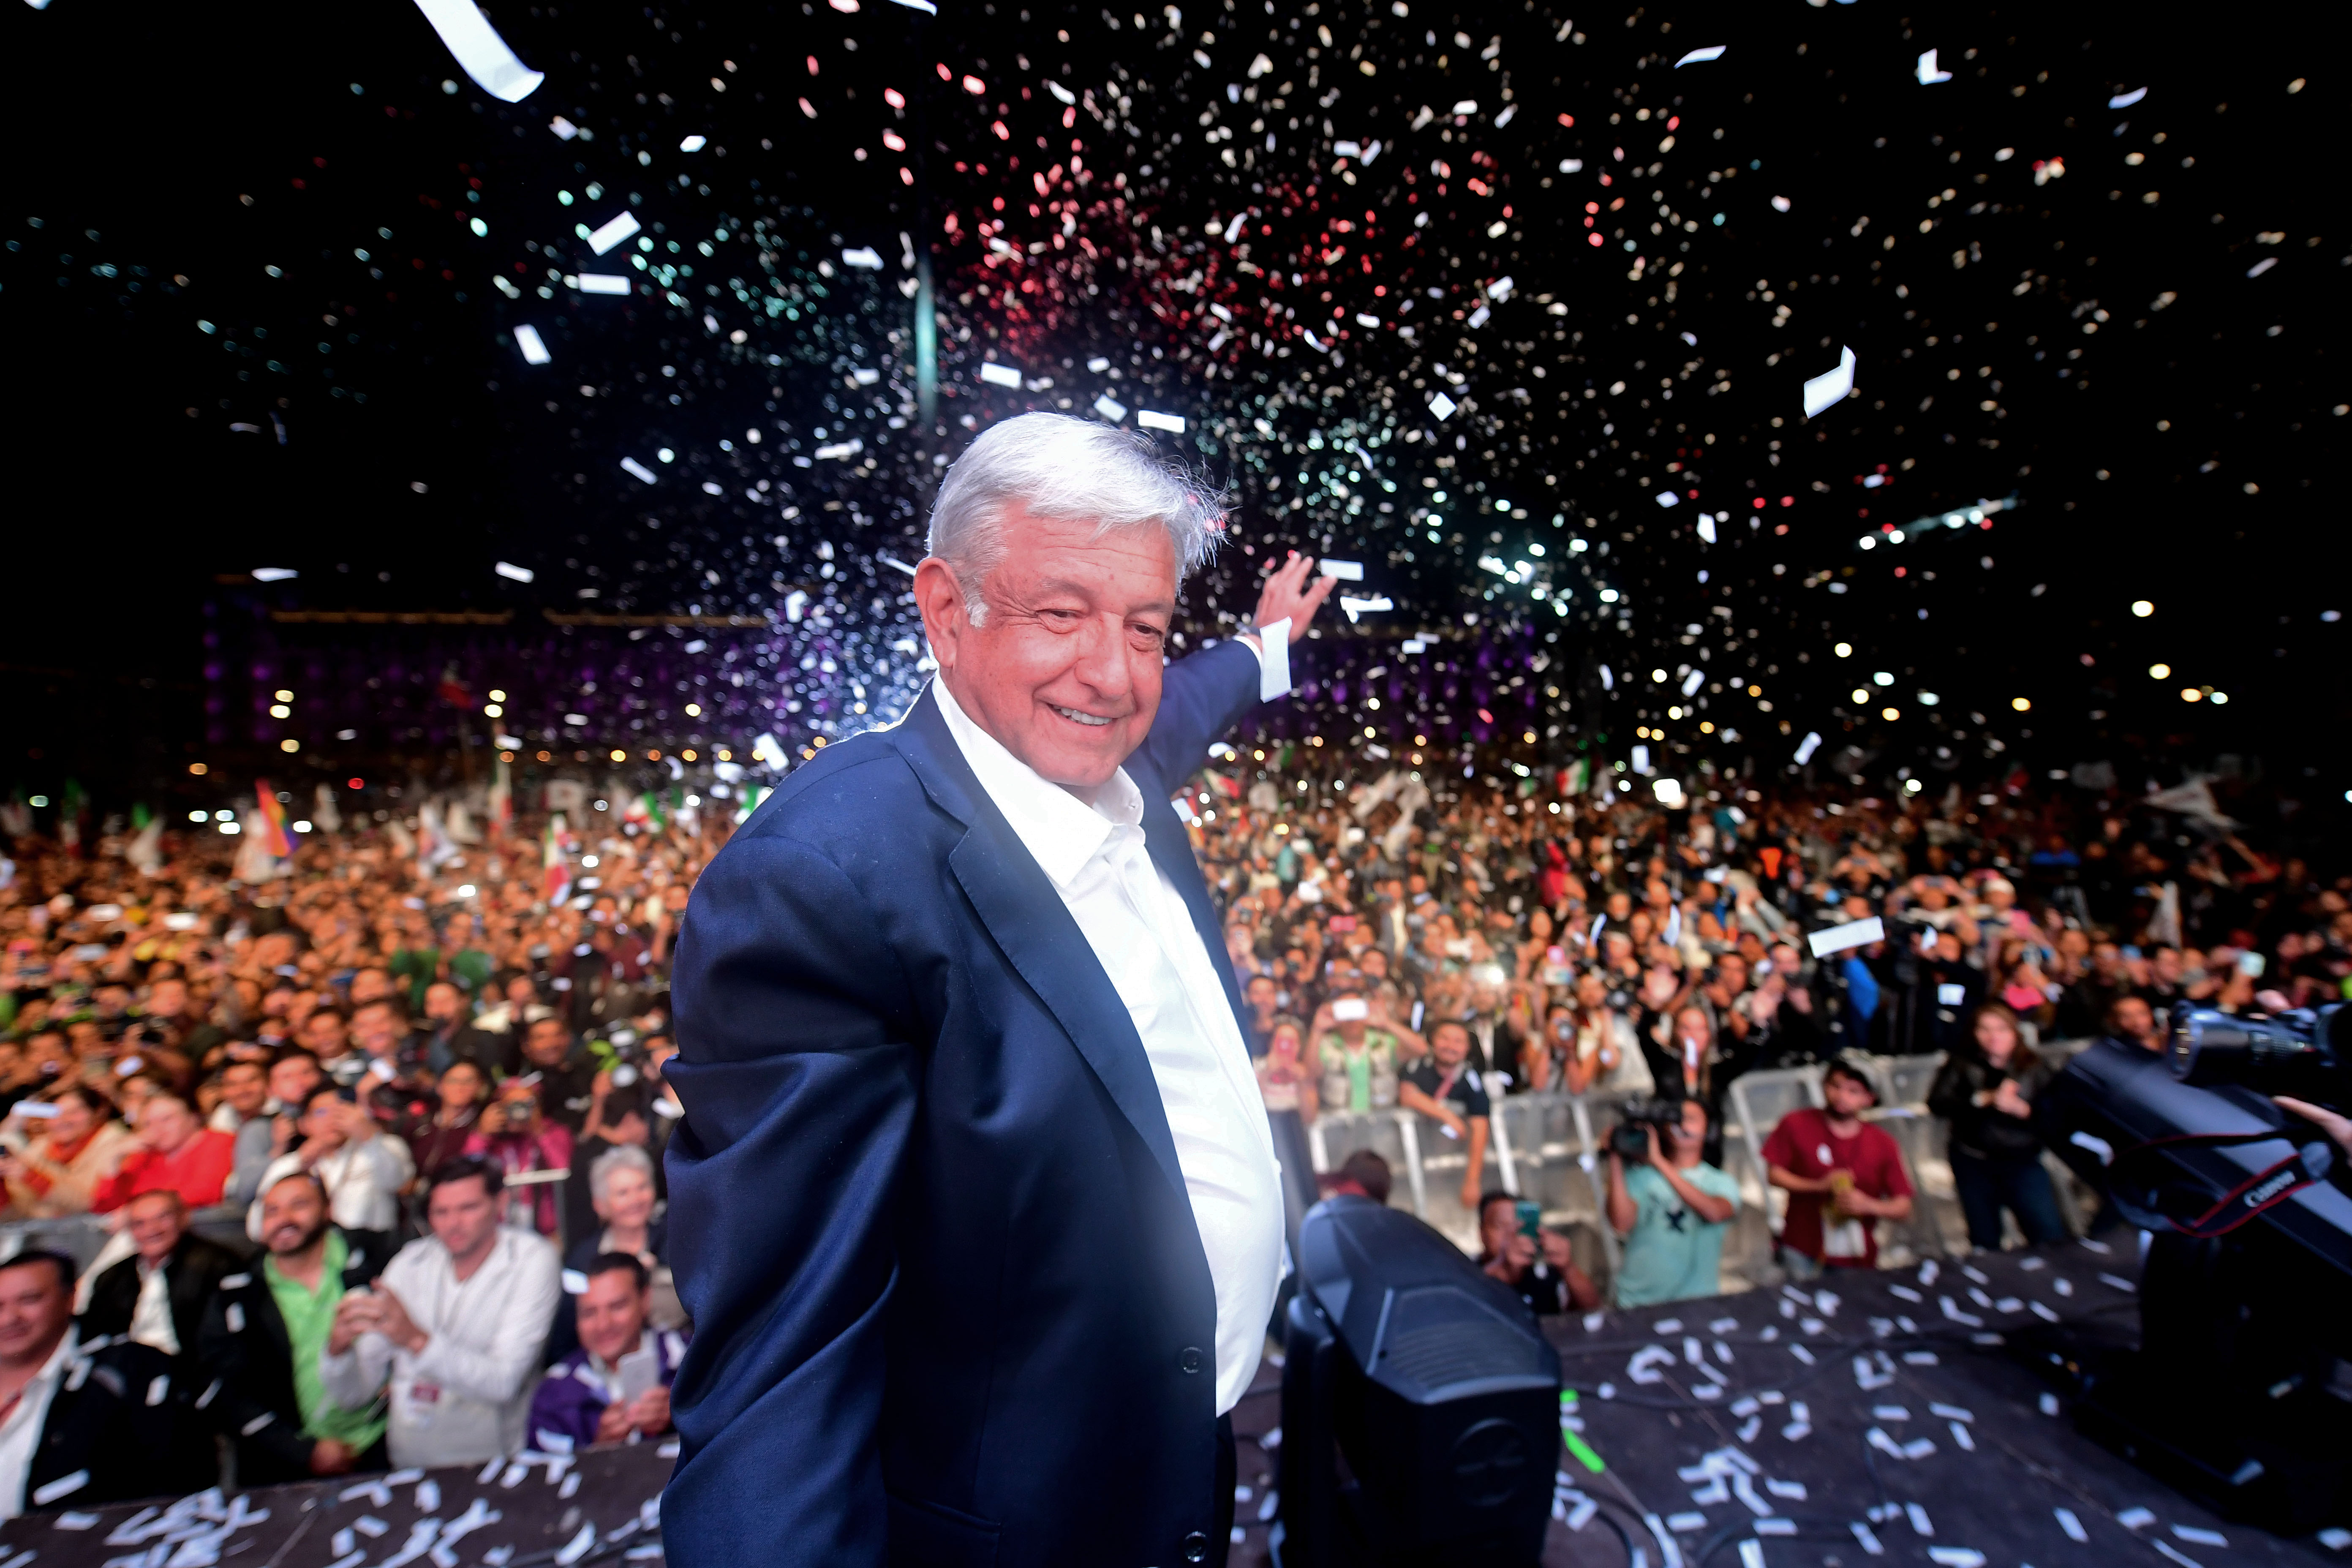 Andres Manuel Lopez Obrador waves to supporters